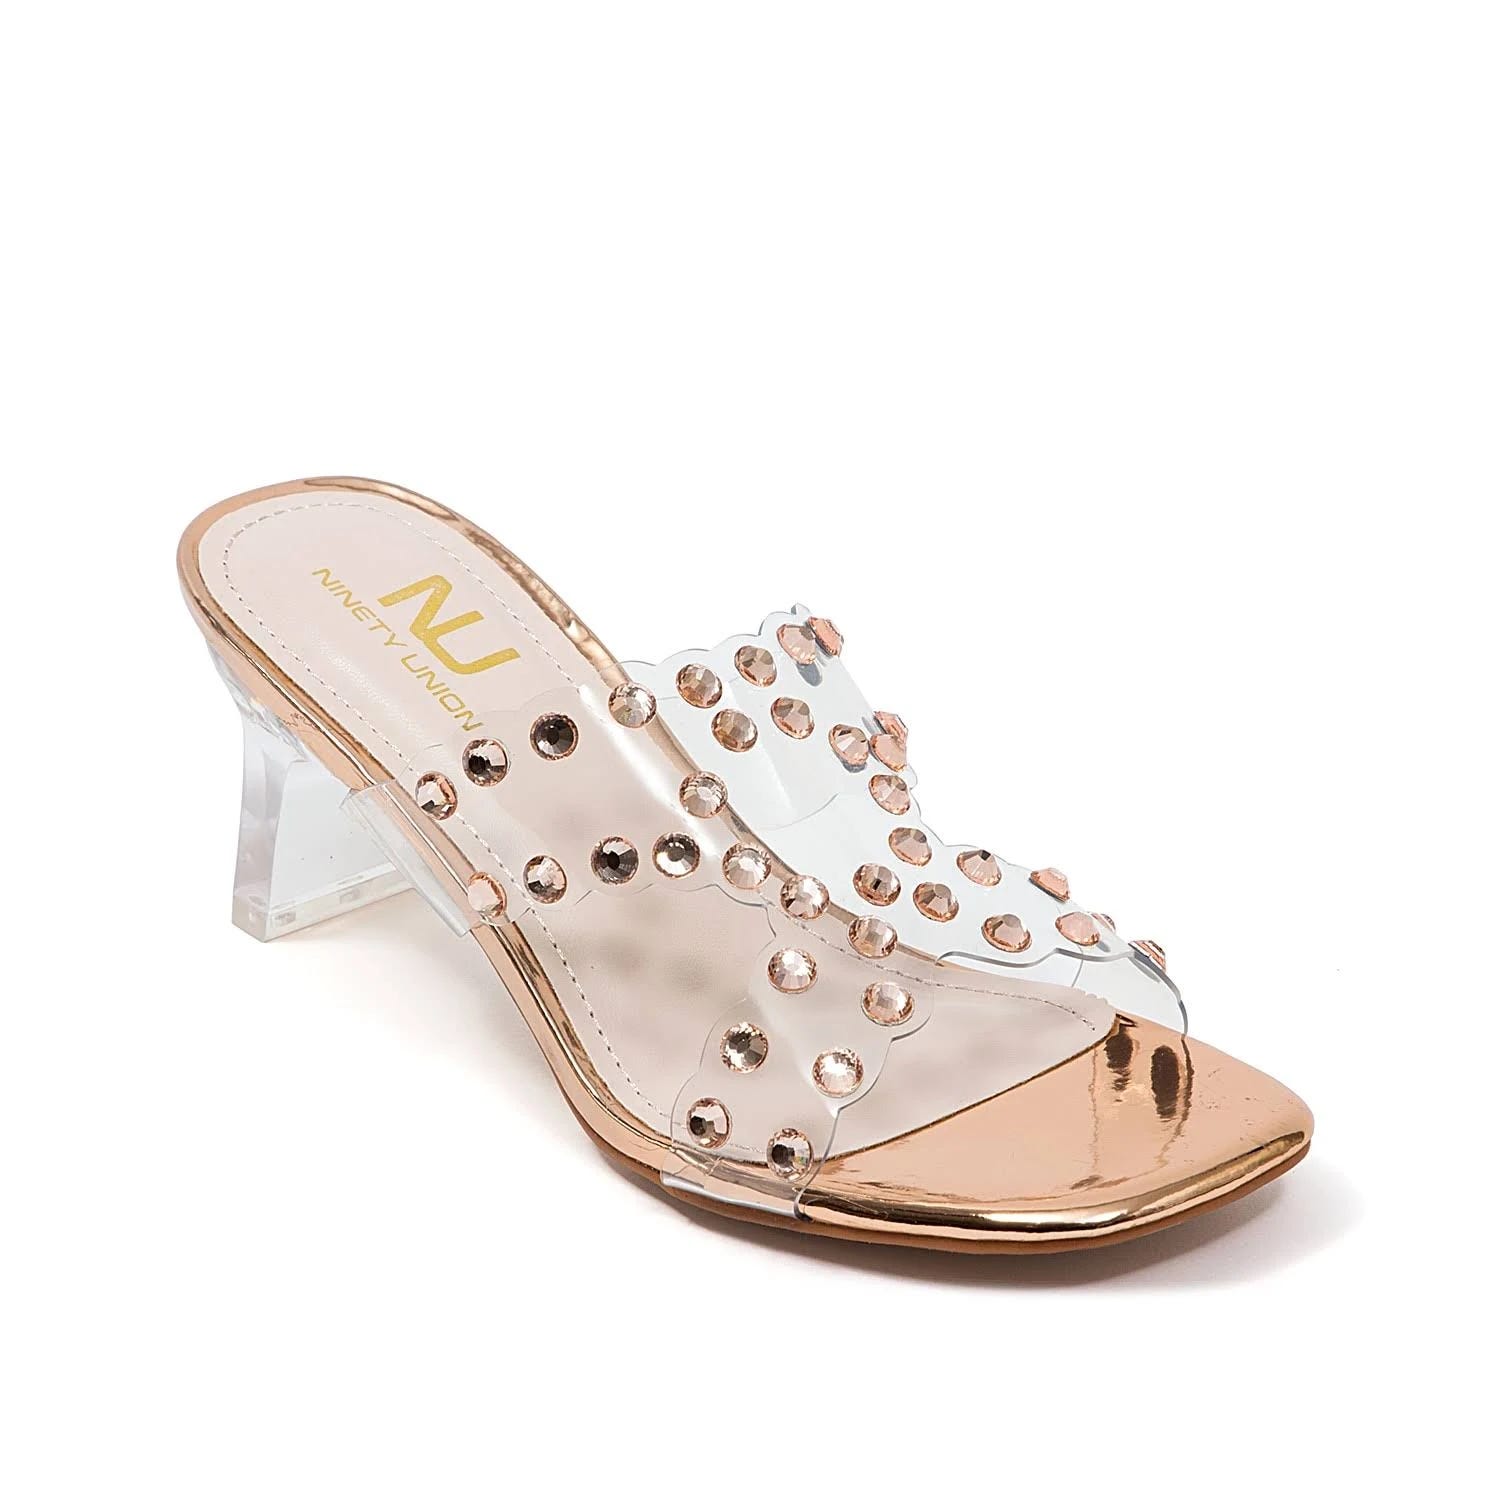 Stylish Lucite Heels with Transparent Upper and Studded Detail | Image